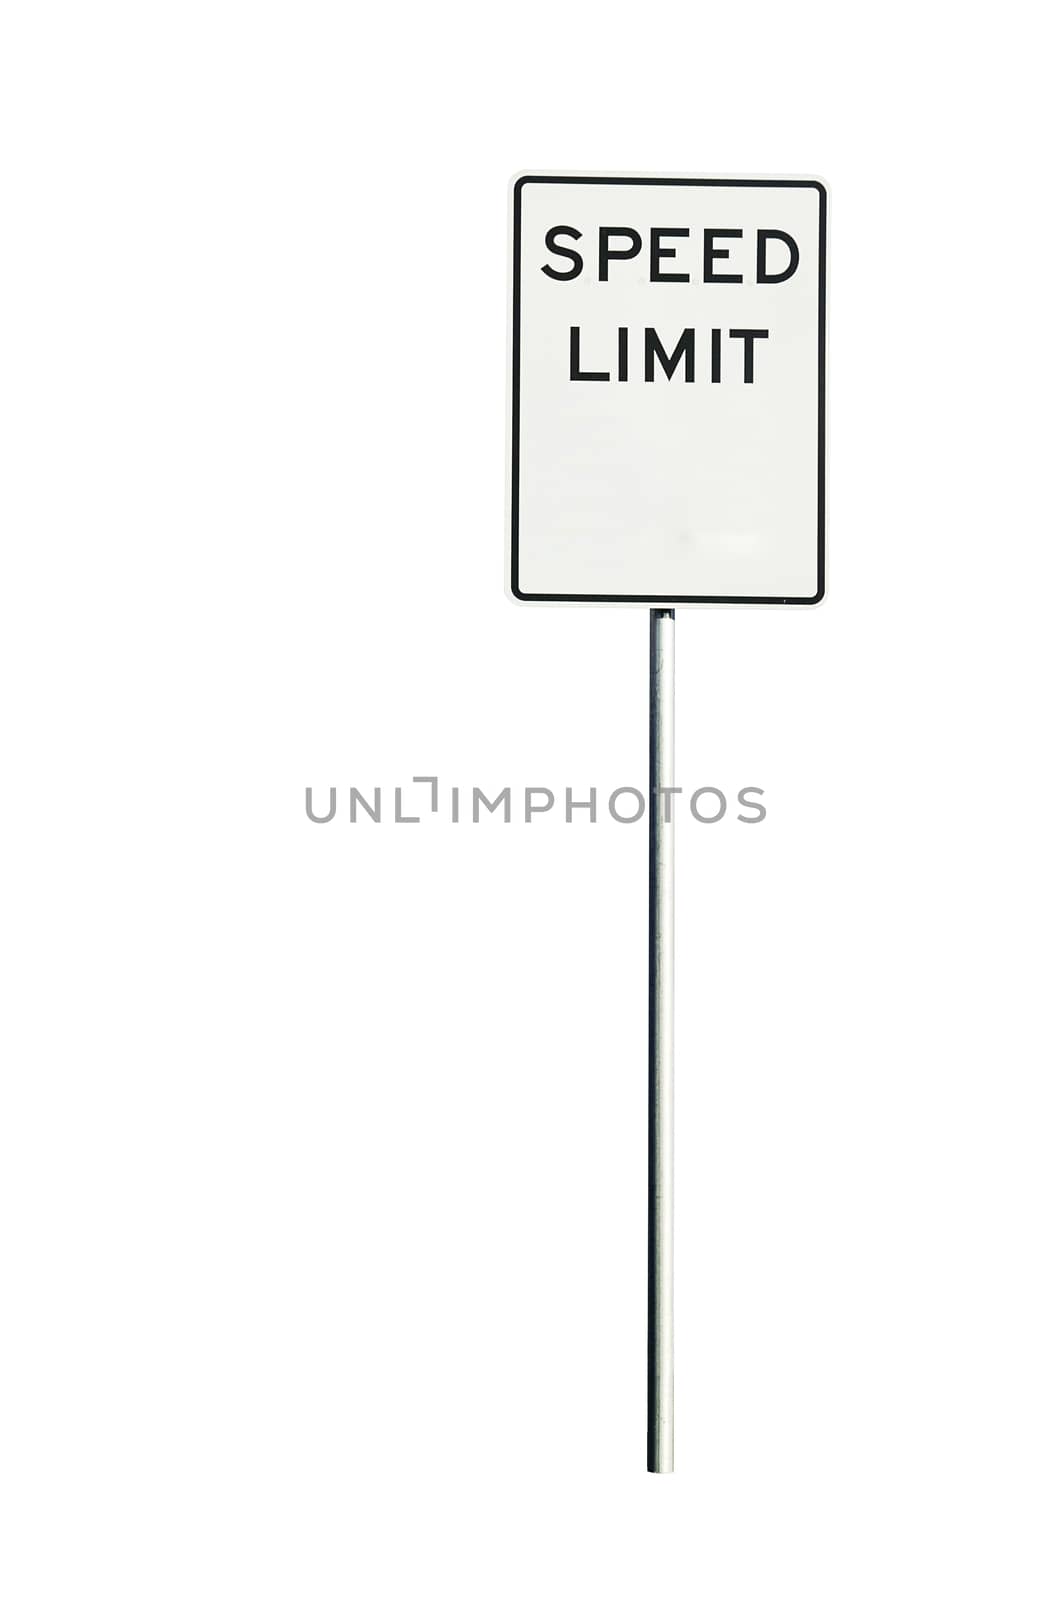 USA speed limit sign with blank area to add your own speed, isolated on a white background with a clipping path